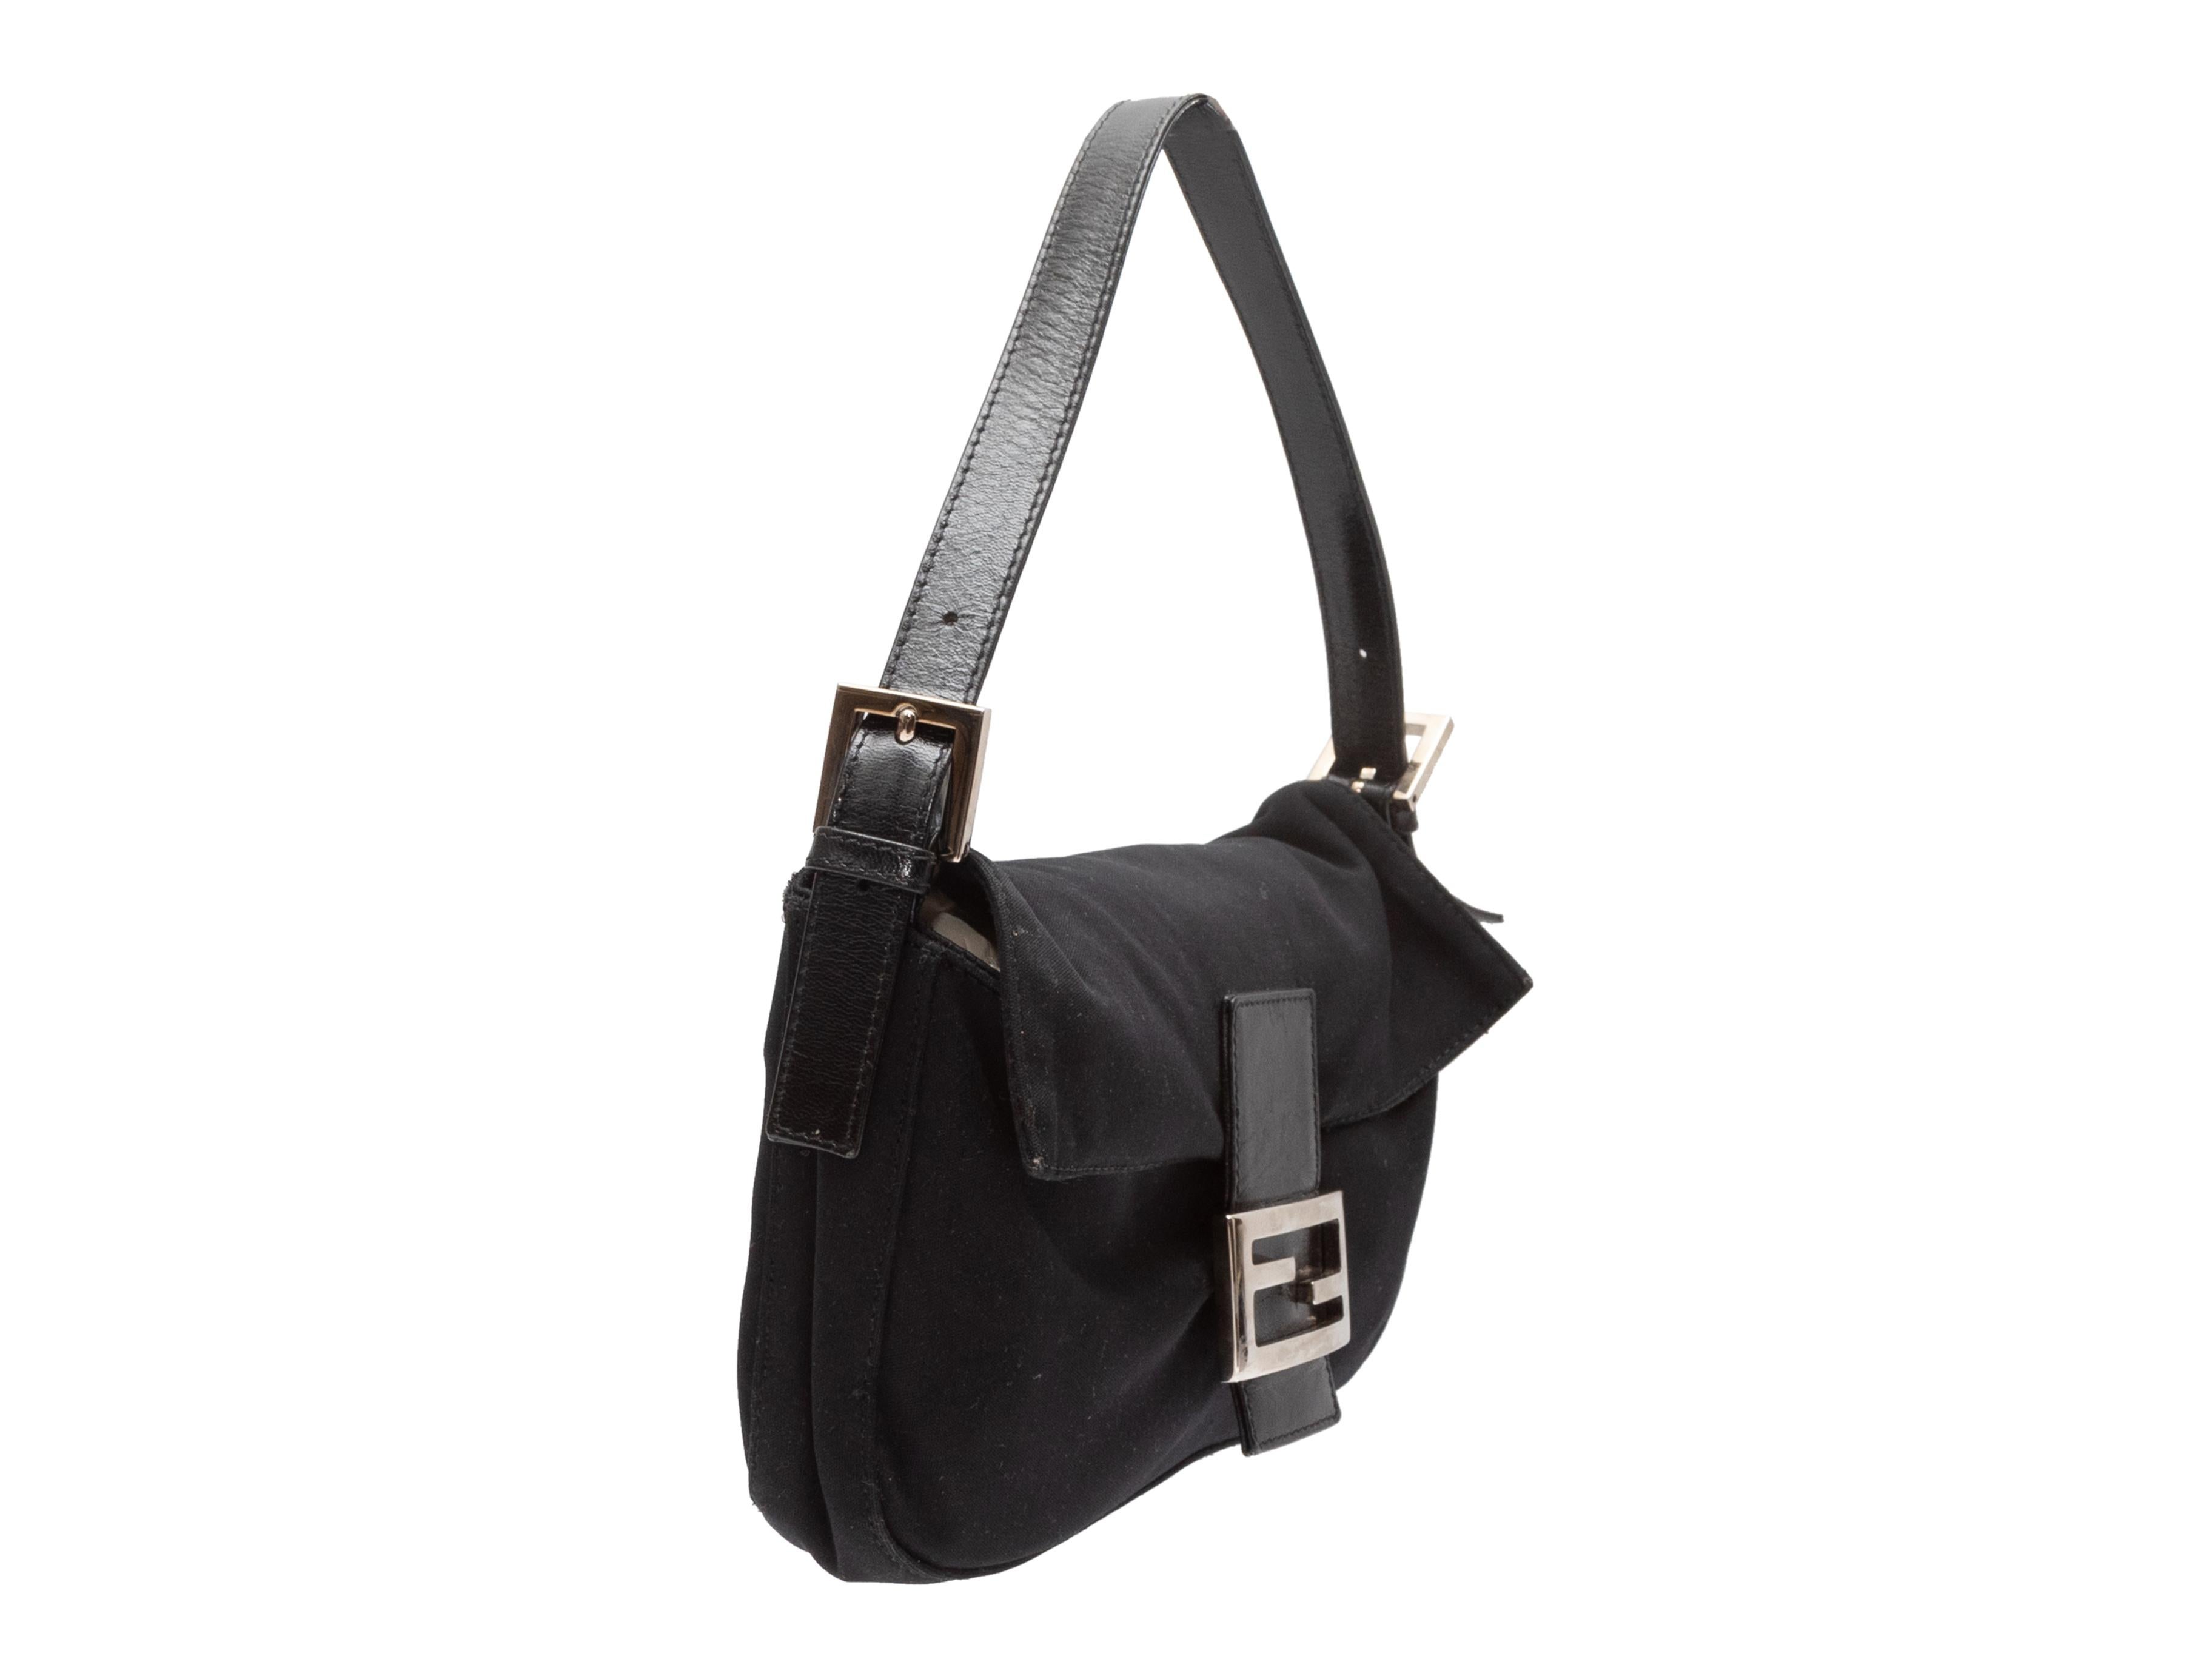 Black Fendi Neoprene & Leather Baguette Bag. This bag features a neoprene body, silver-tone hardware, leather trim, a single flat shoulder strap, and a front logo flap closure. 10.5